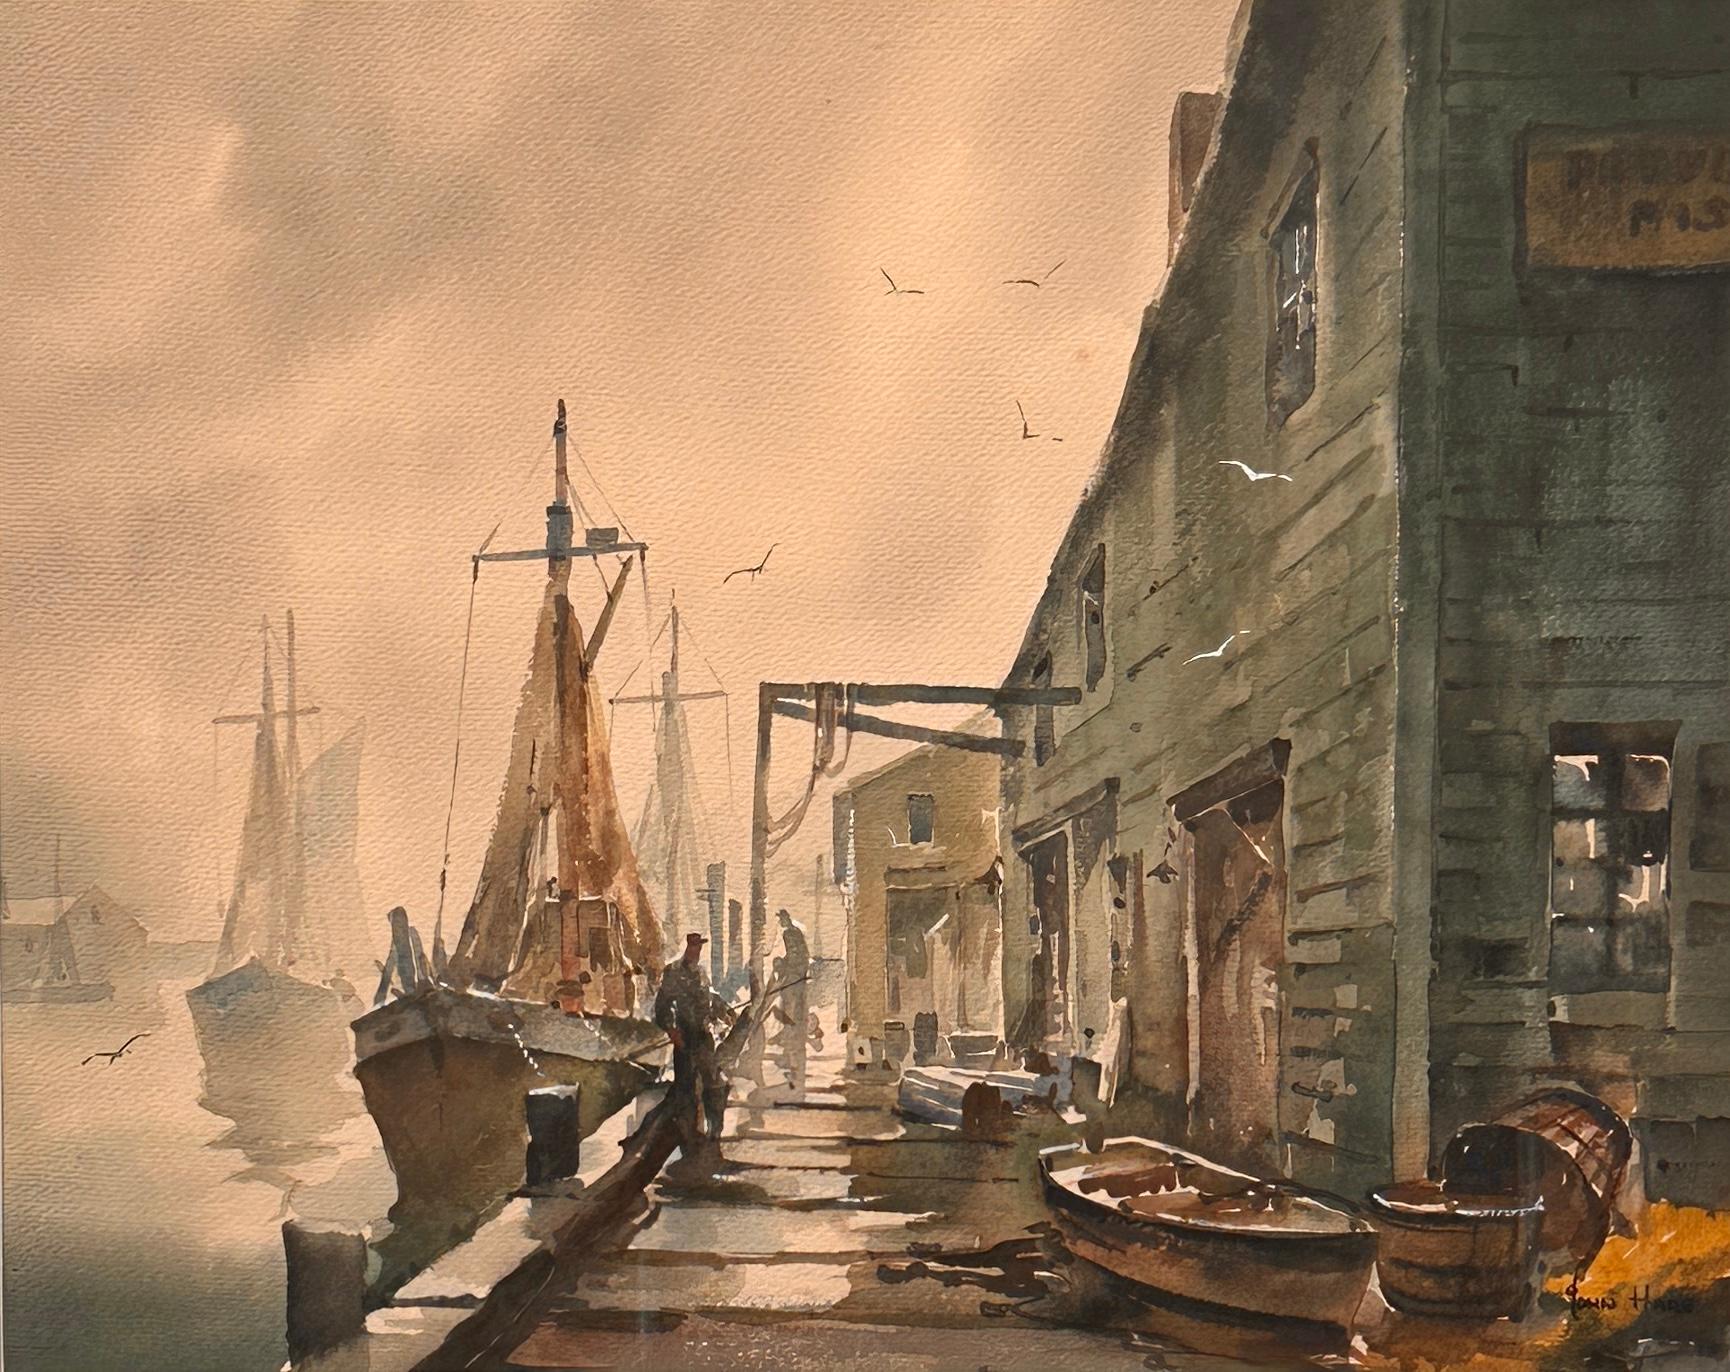 John Cuthbert Hare Landscape Art - "Cloudy Dock Scene", working peir with fishermen, boats, and architecture 